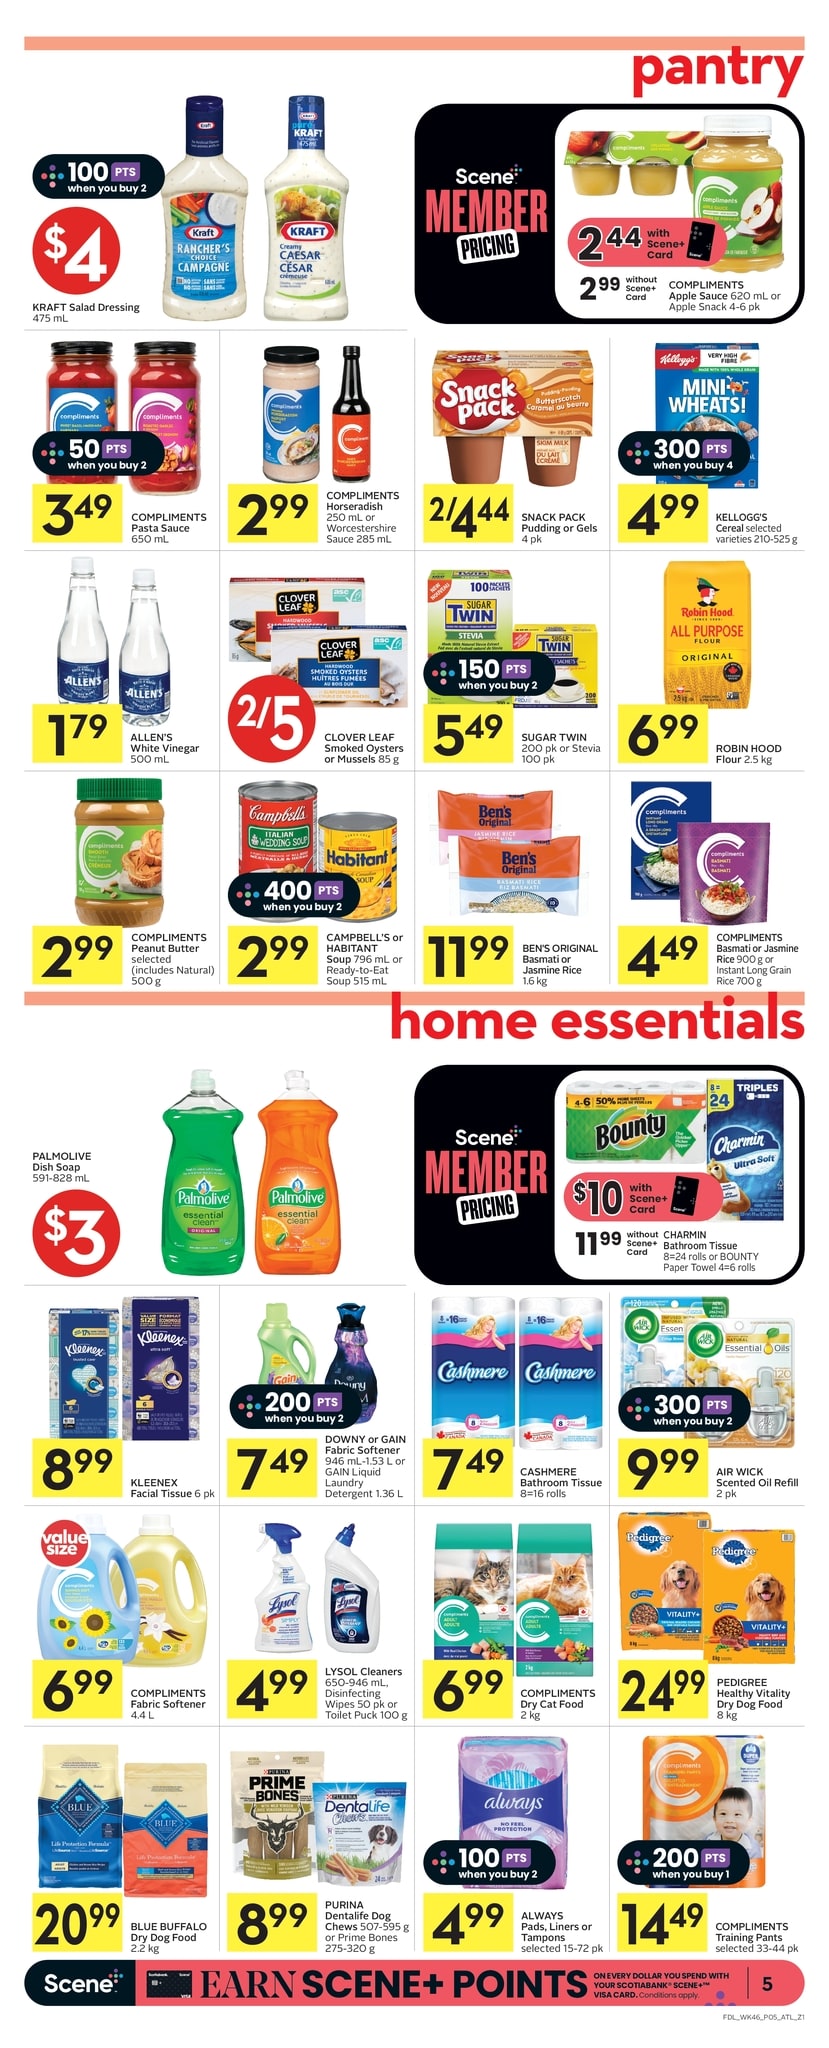 Foodland - New Brunswick - Weekly Flyer Specials - Page 5